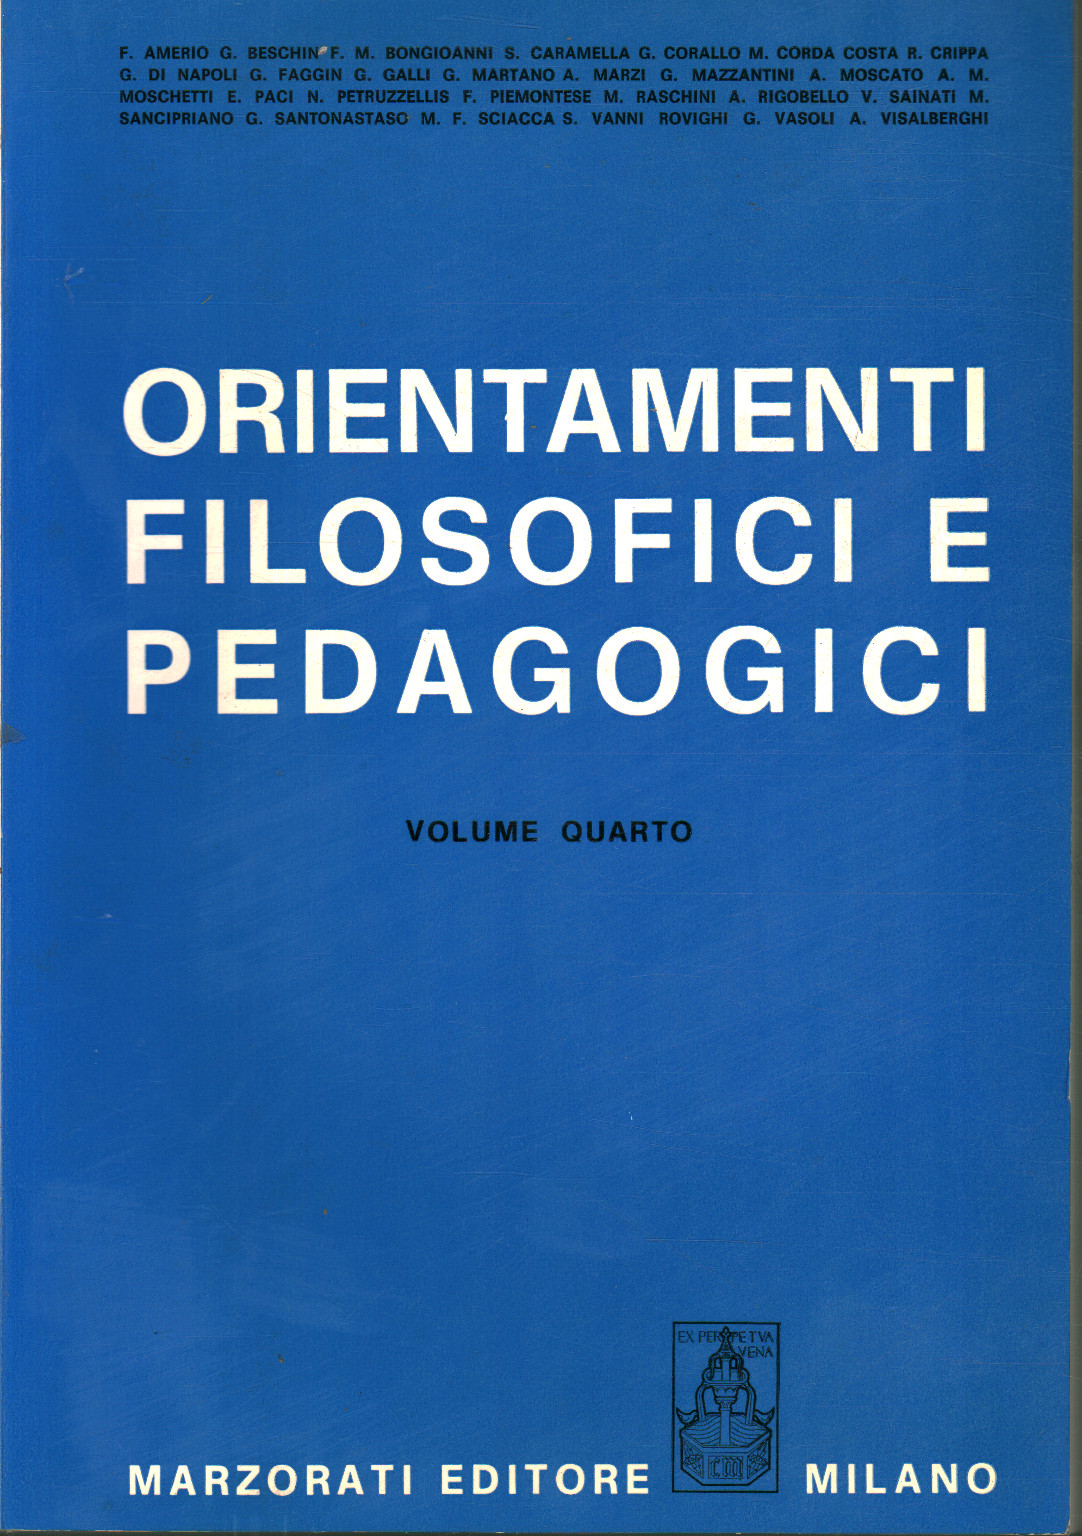 Philosophical and pedagogical orientations (volume four)